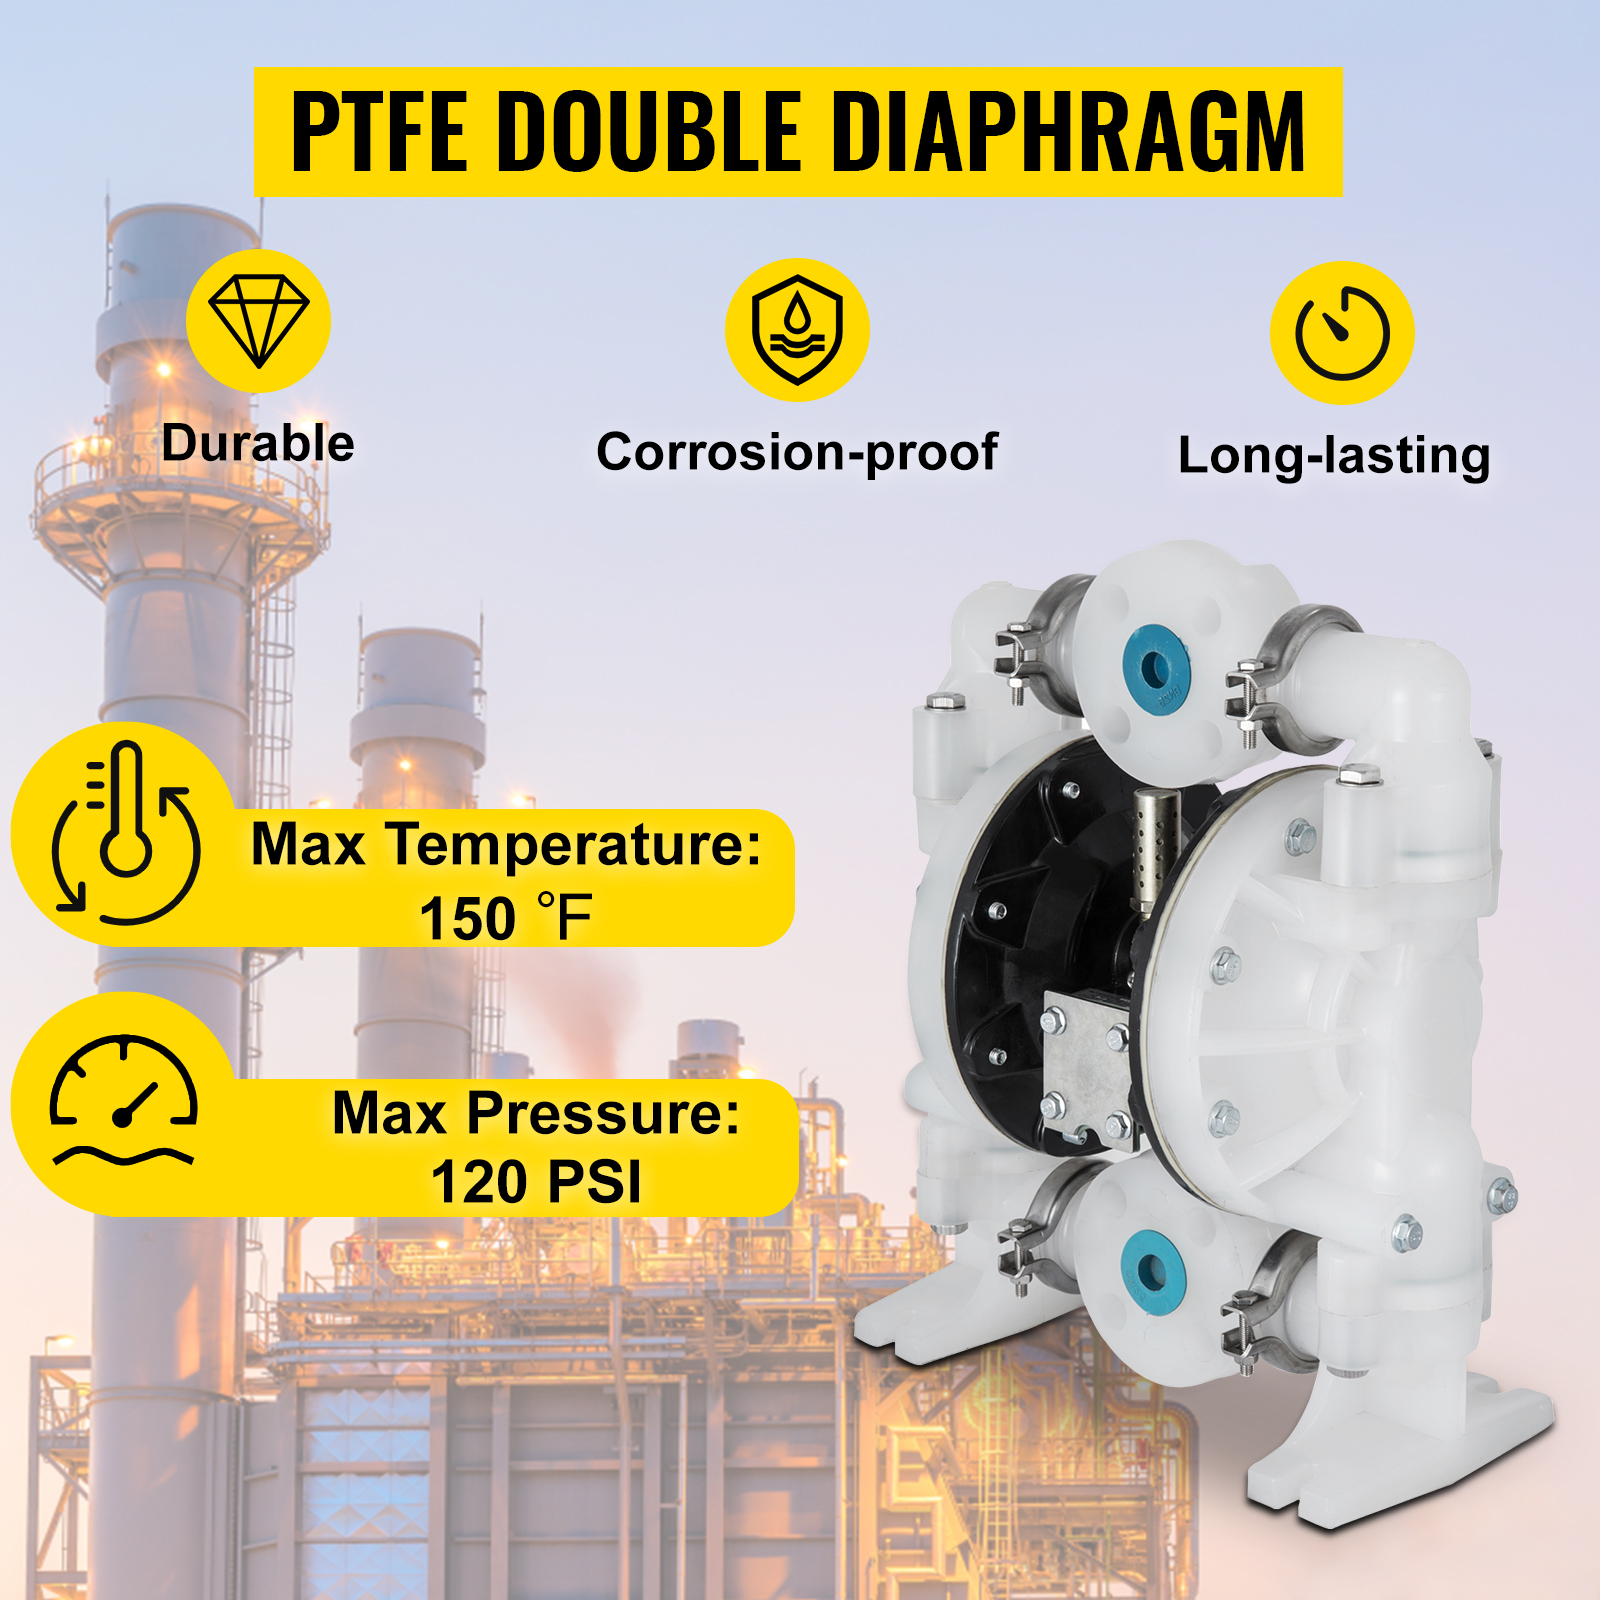 VEVOR Air-Operated Double Diaphragm Pump, 1/2 in Inlet & Outlet,  Polypropylene Body, 13.2 GPM & Max 120PSI, PTFE Diaphragm Pneumatic  Transfer Pump for Petroleum, Diesel, Oil & Low Viscosity Fluids